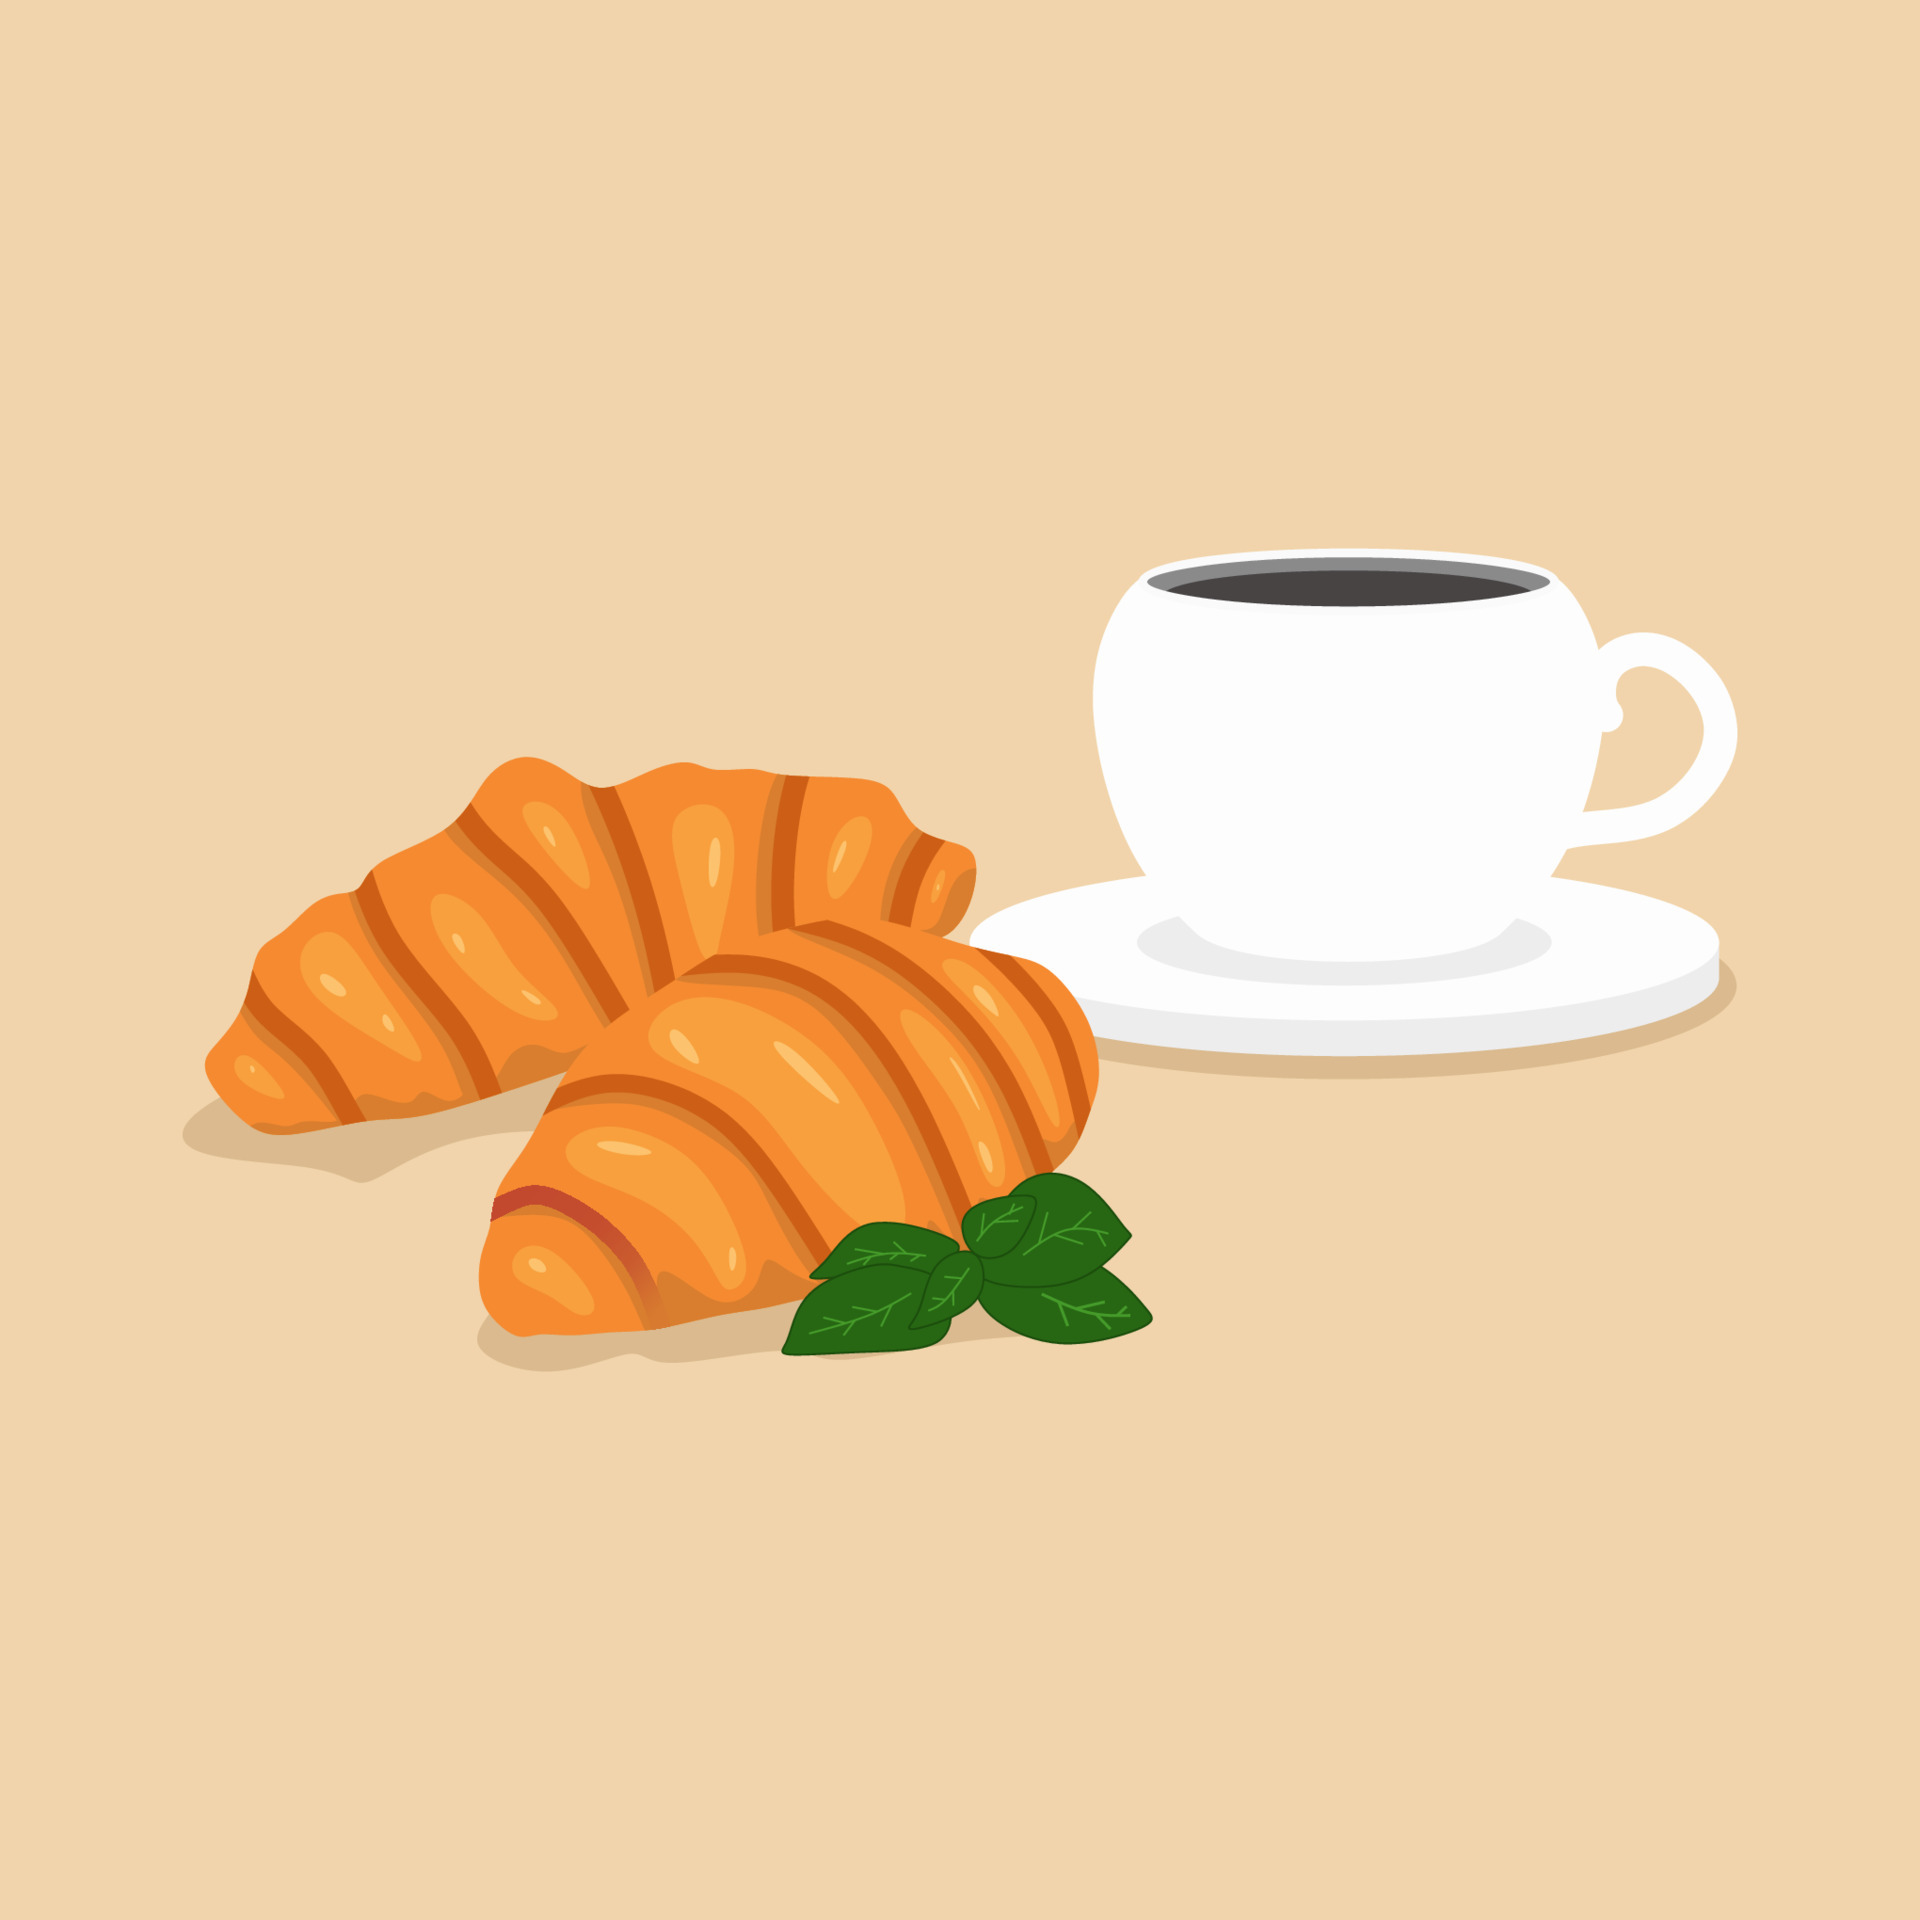 French breakfast croissant food with cup Vector Image